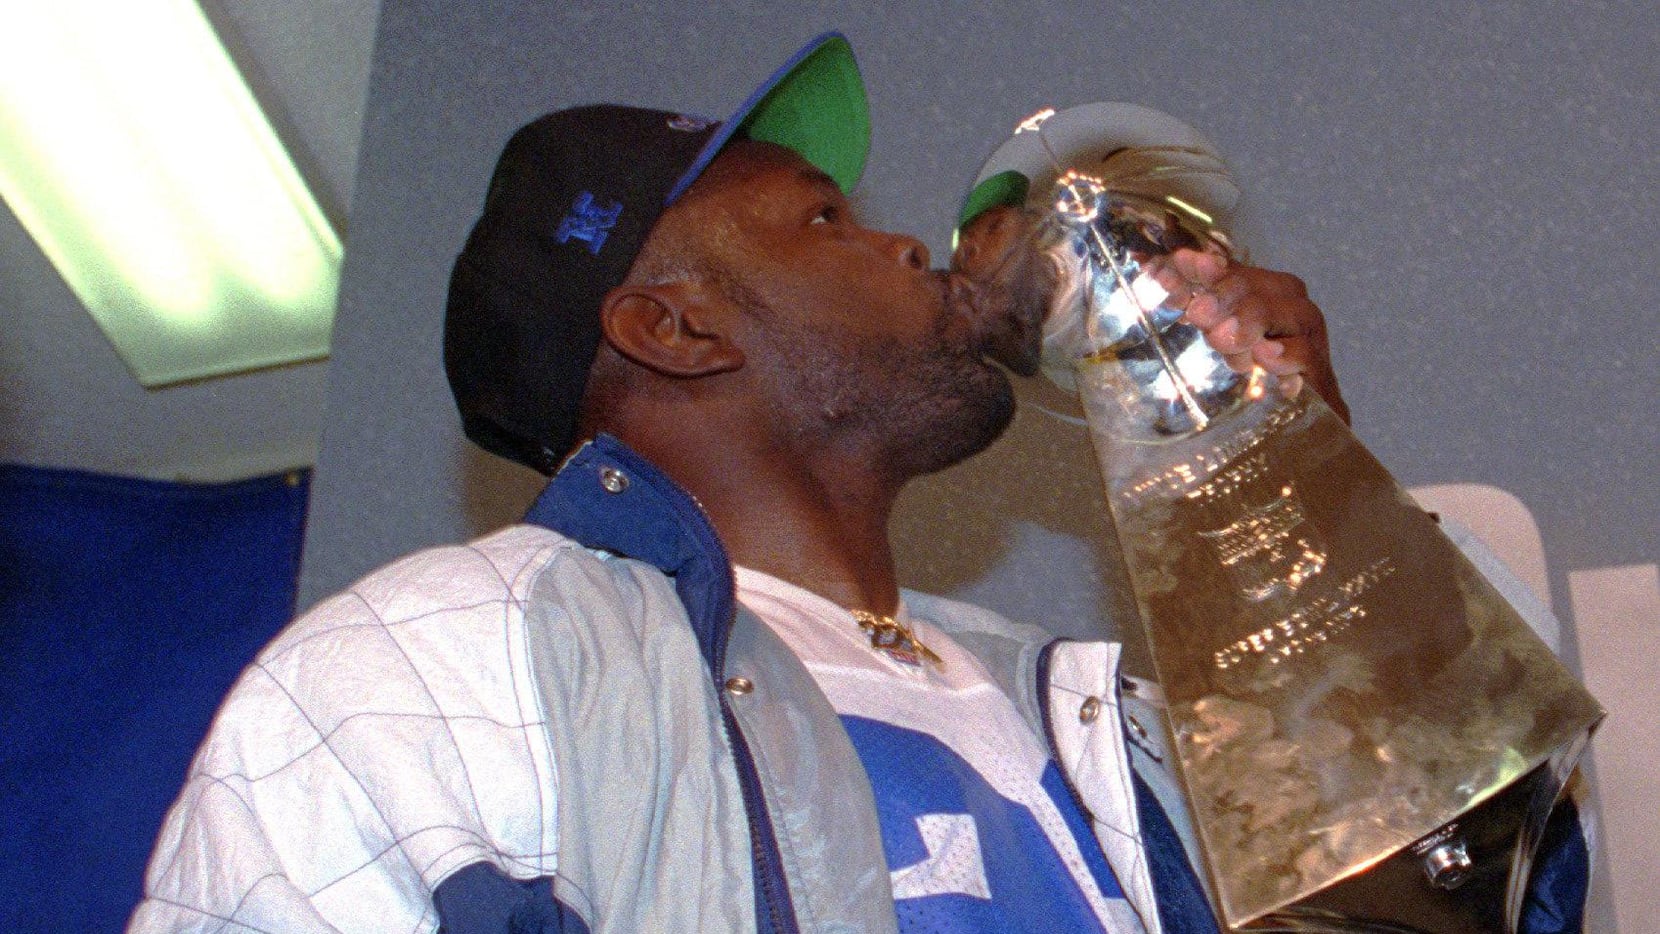 Relive Tampa Bay's first Super Bowl win 18 years later